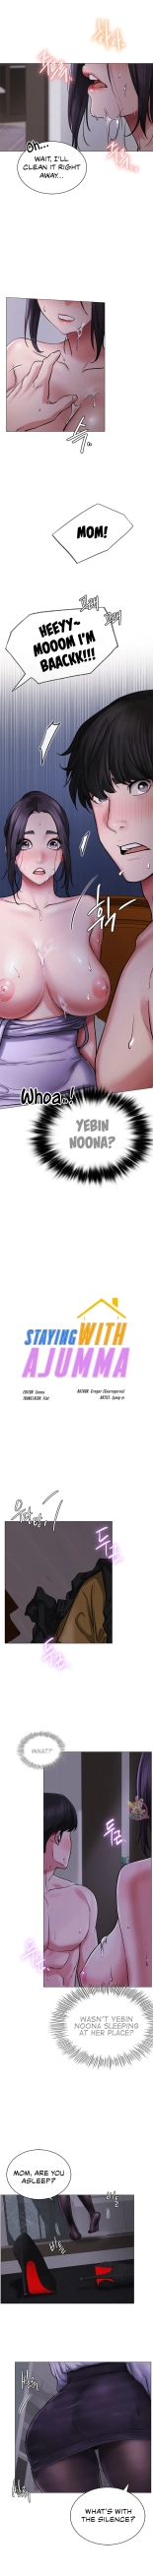 Staying with Ajumma : page 77